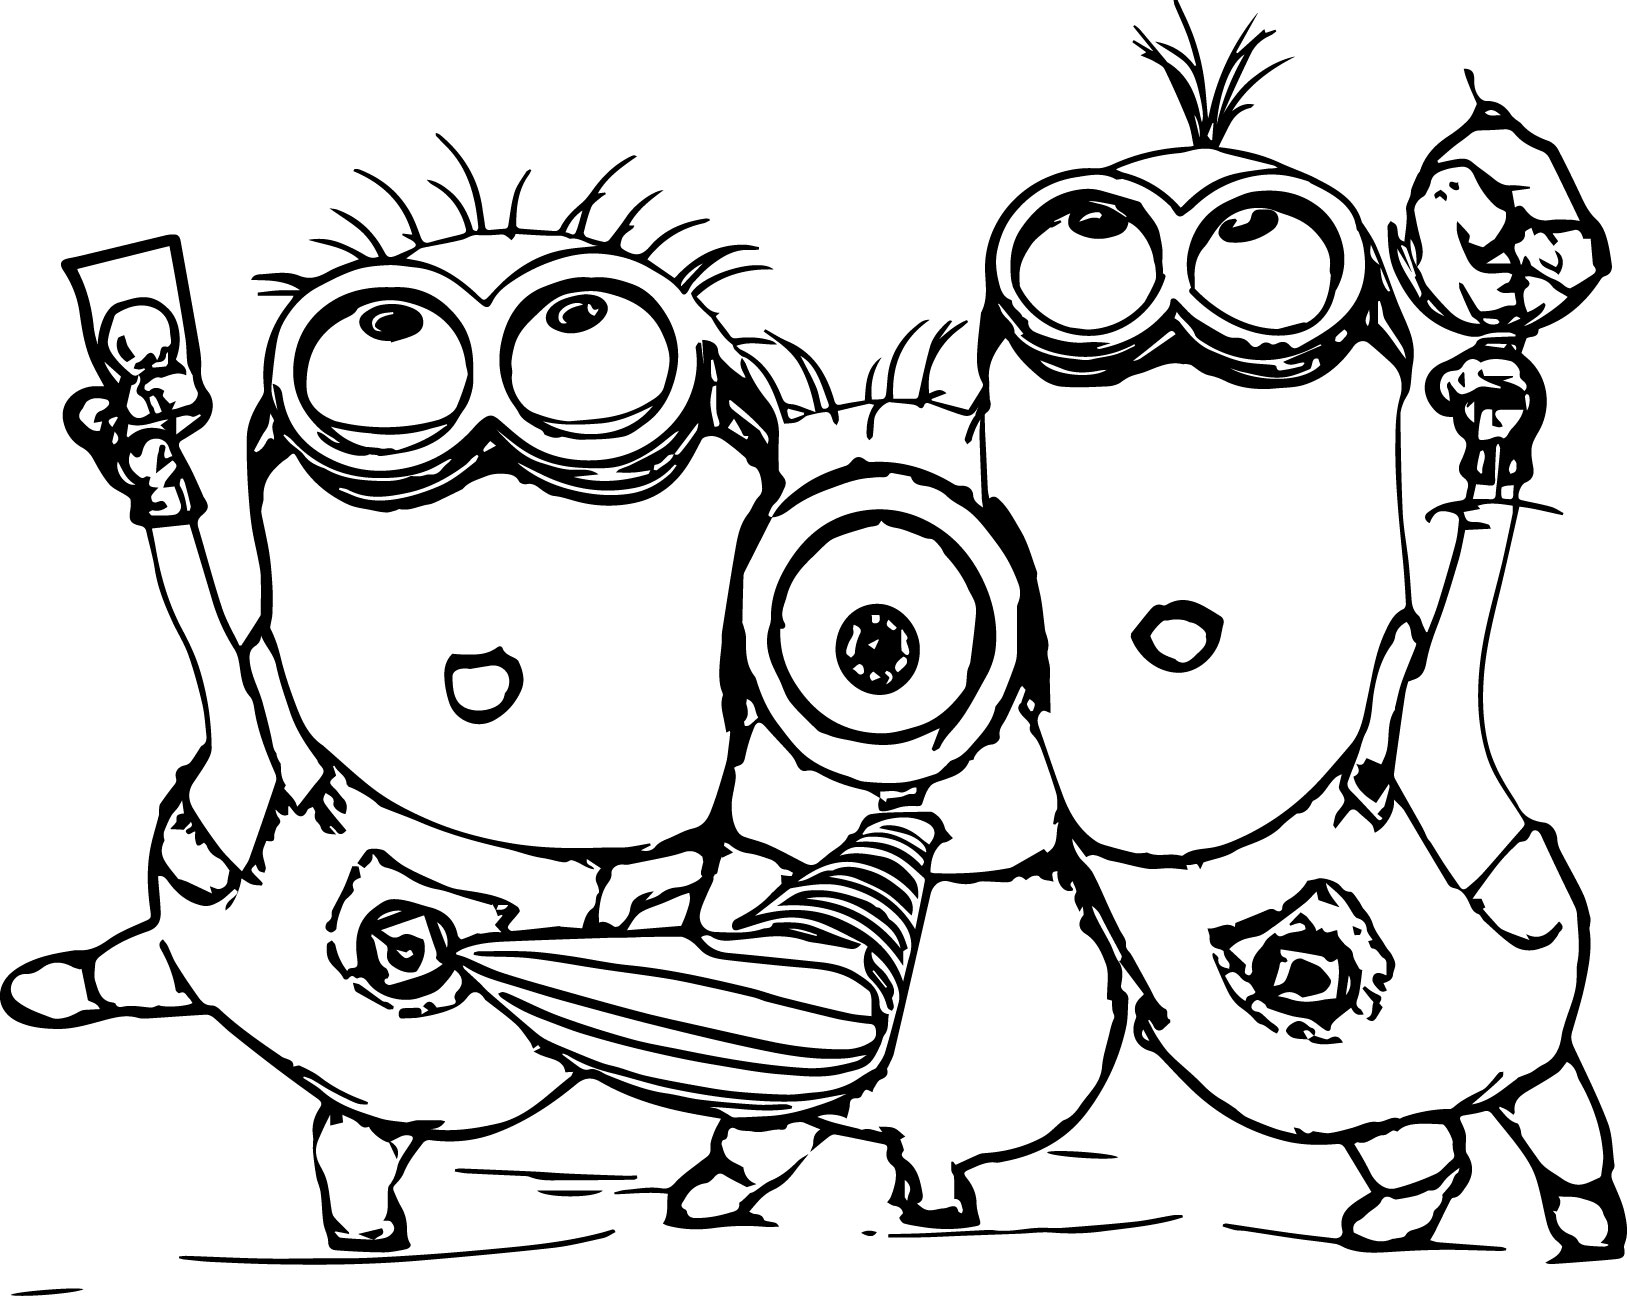 free printable minion coloring pages minion coloring pages best coloring pages for kids free pages coloring printable minion 